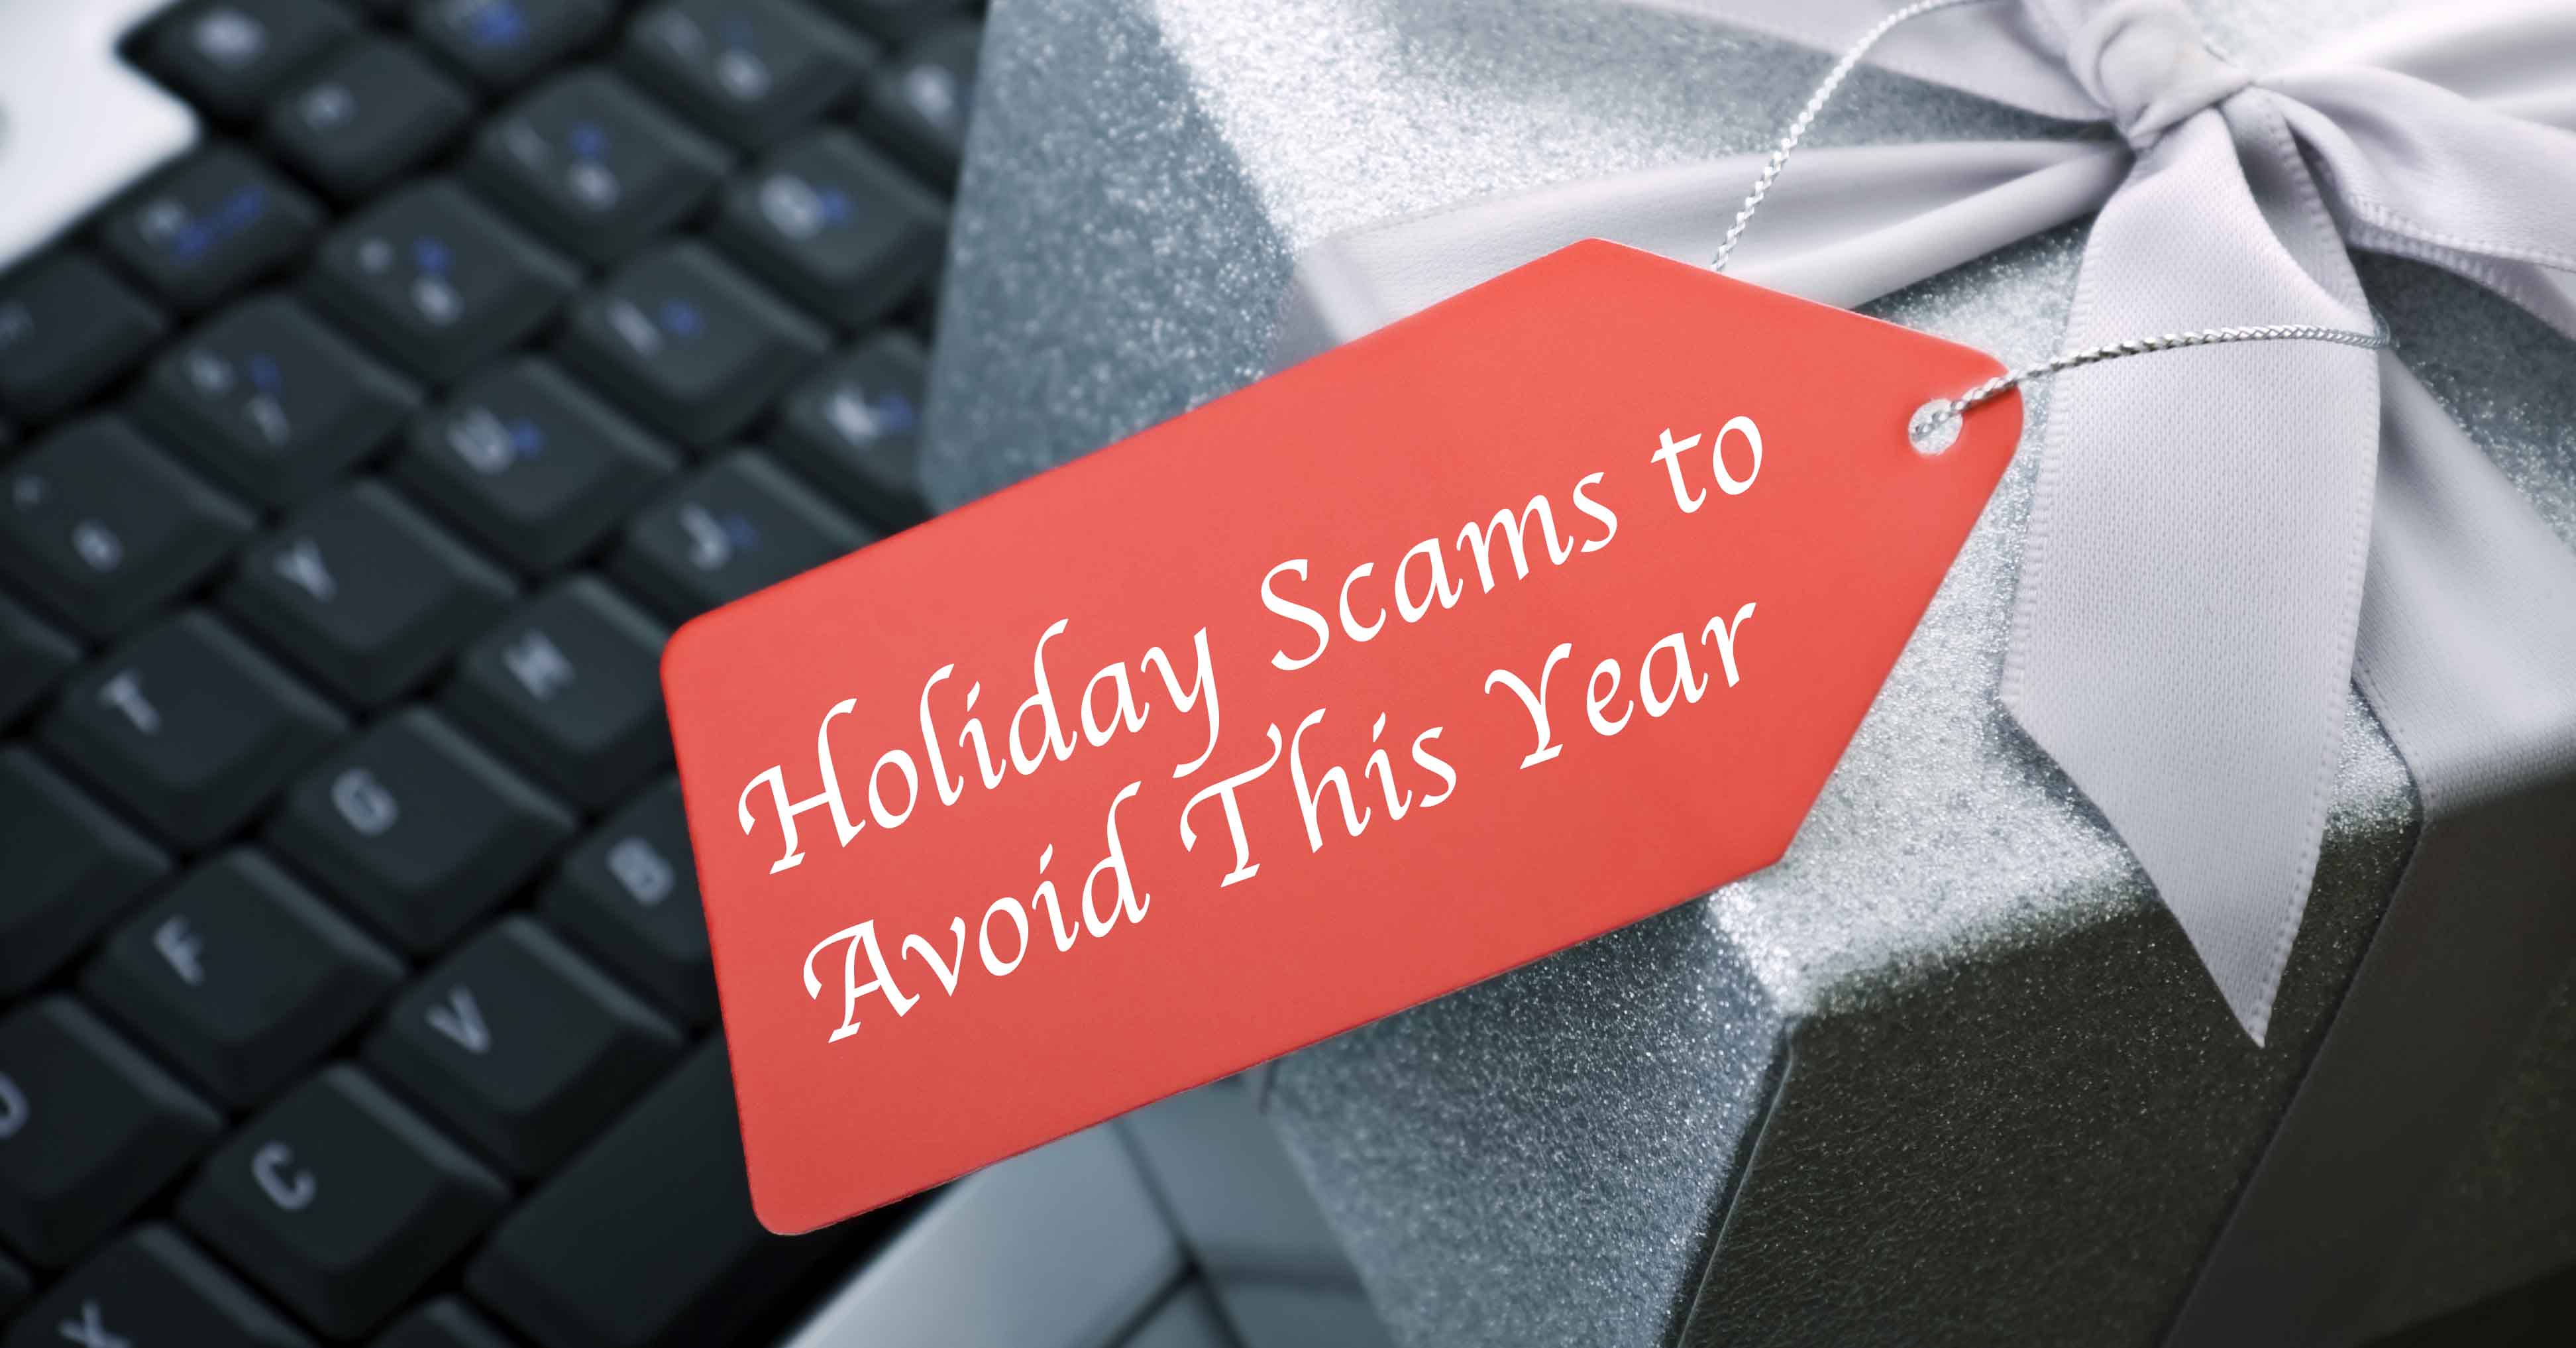 5 Holiday Scams That Will Ruin Christmas (And How to Avoid Them)